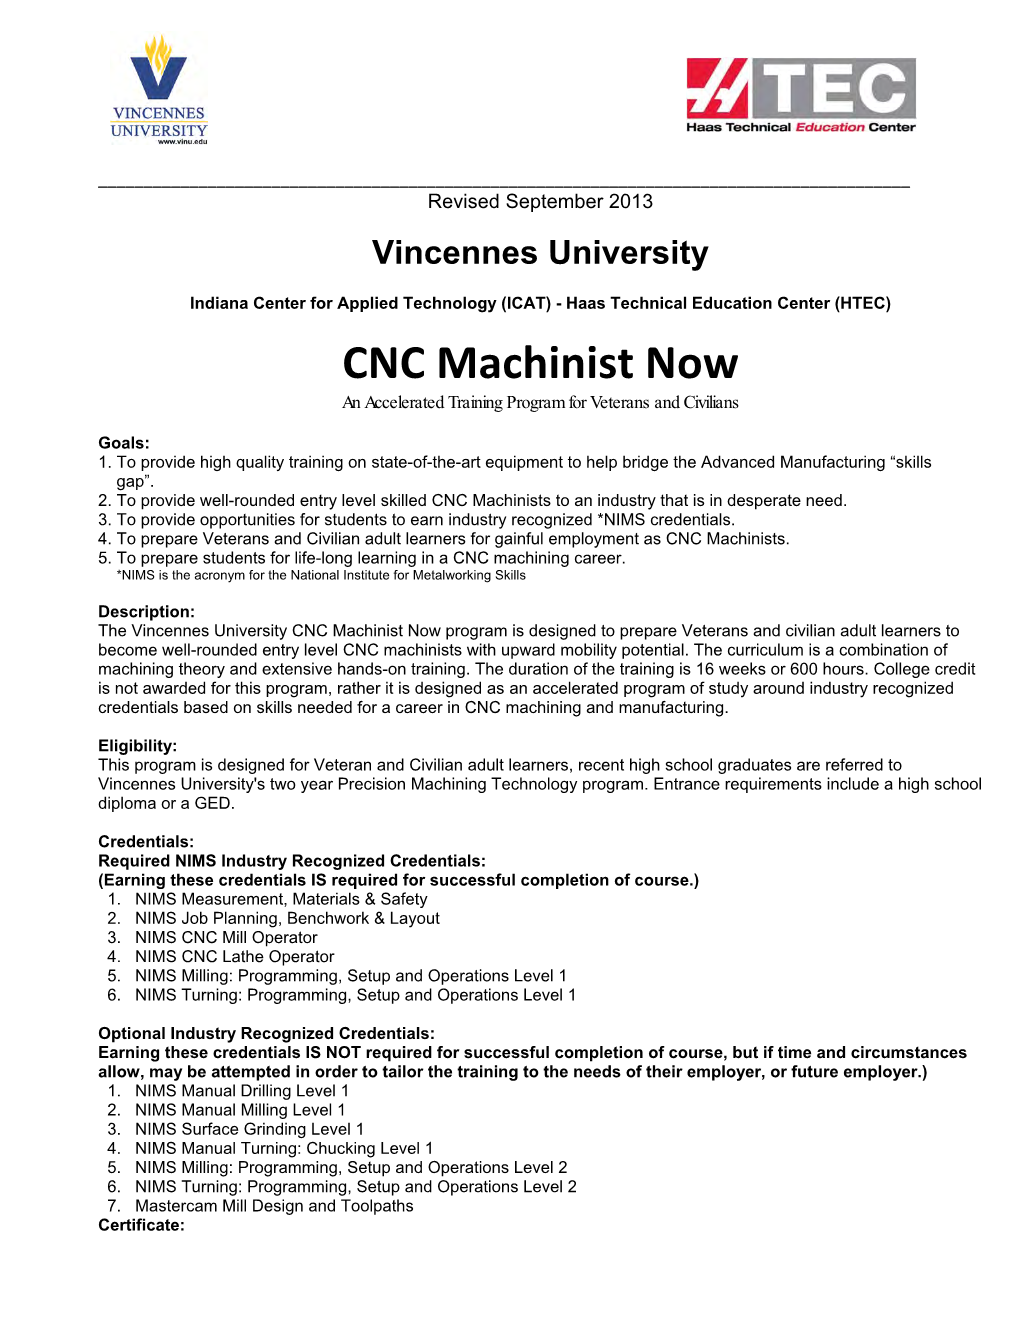 CNC Machinist Now an Accelerated Training Program for Veterans and Civilians